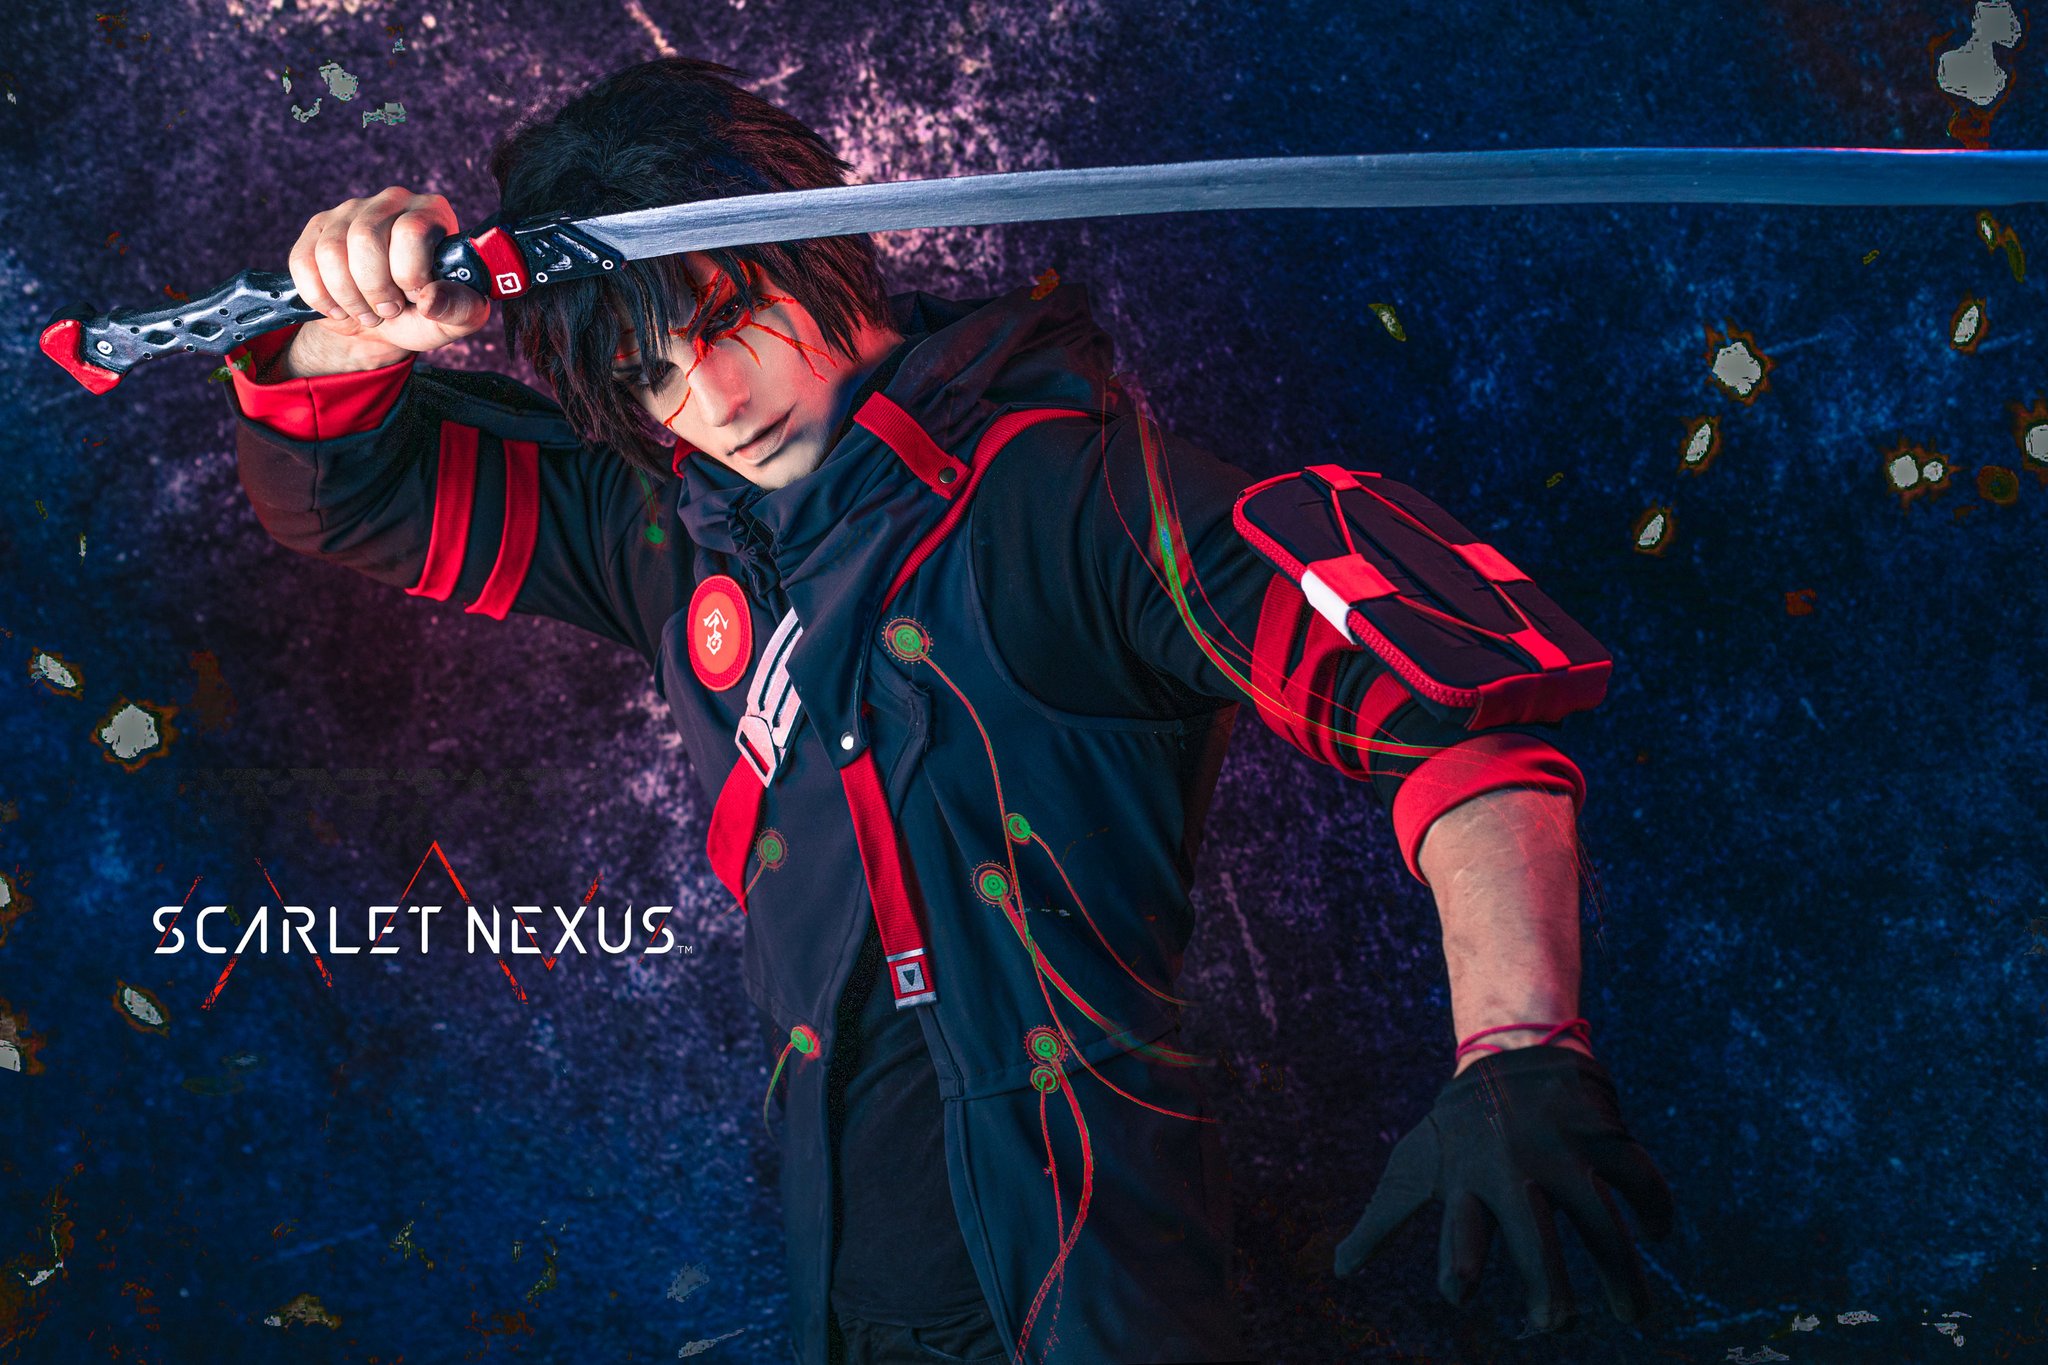 SCARLET NEXUS – Character Card Yuito, Meet Yuito Sumeragi, a new recruit  for the OSF. Get the latest SCARLET NEXUS news from our official channels:  Twitter